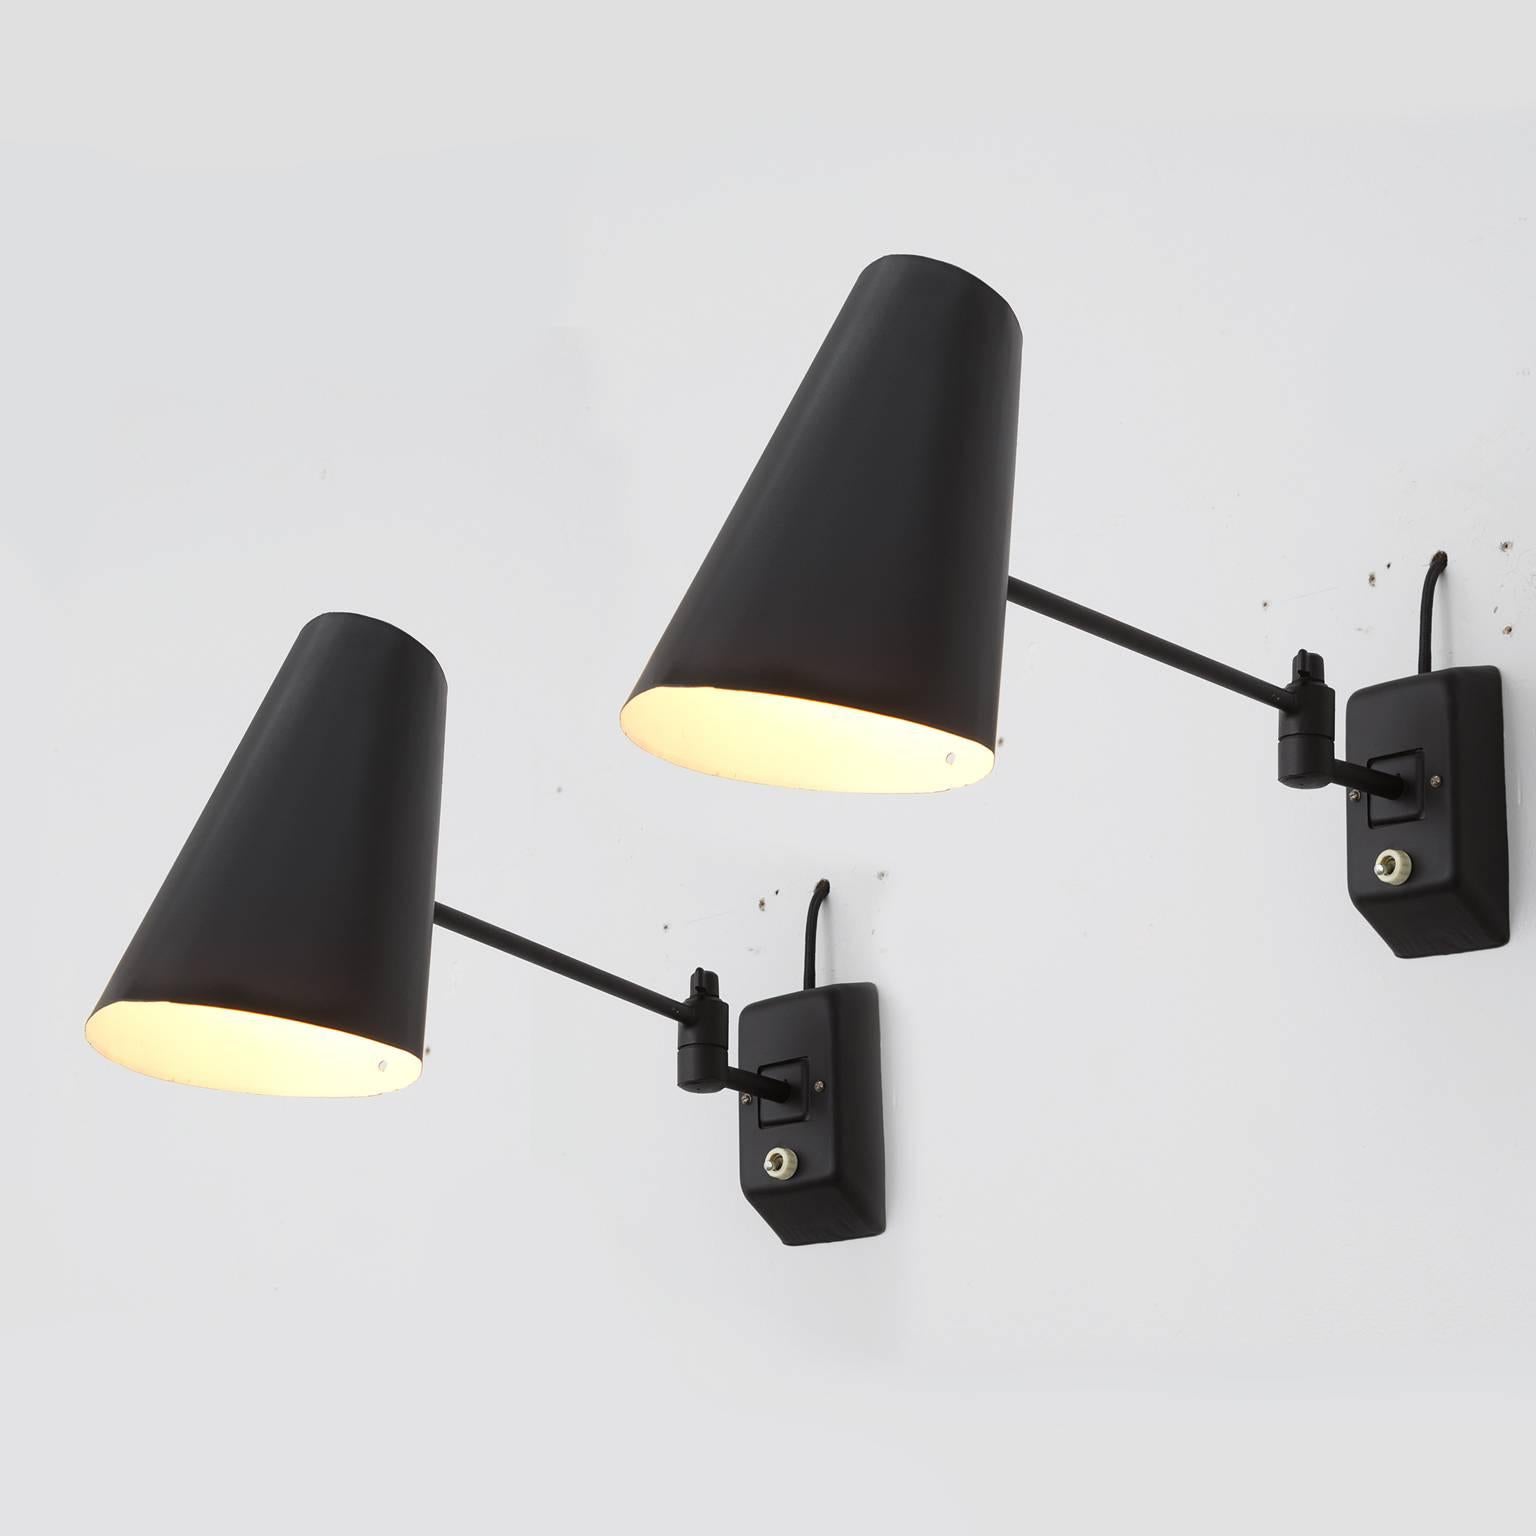 Set of wall lights in black metal, Europe, 1960s.

The tapered shade of thin metal sheet was placed onto a thin stem. It can be directed, the turning element is a nice detail, the sconces can be used in a hall way or as bedside lamps. The white